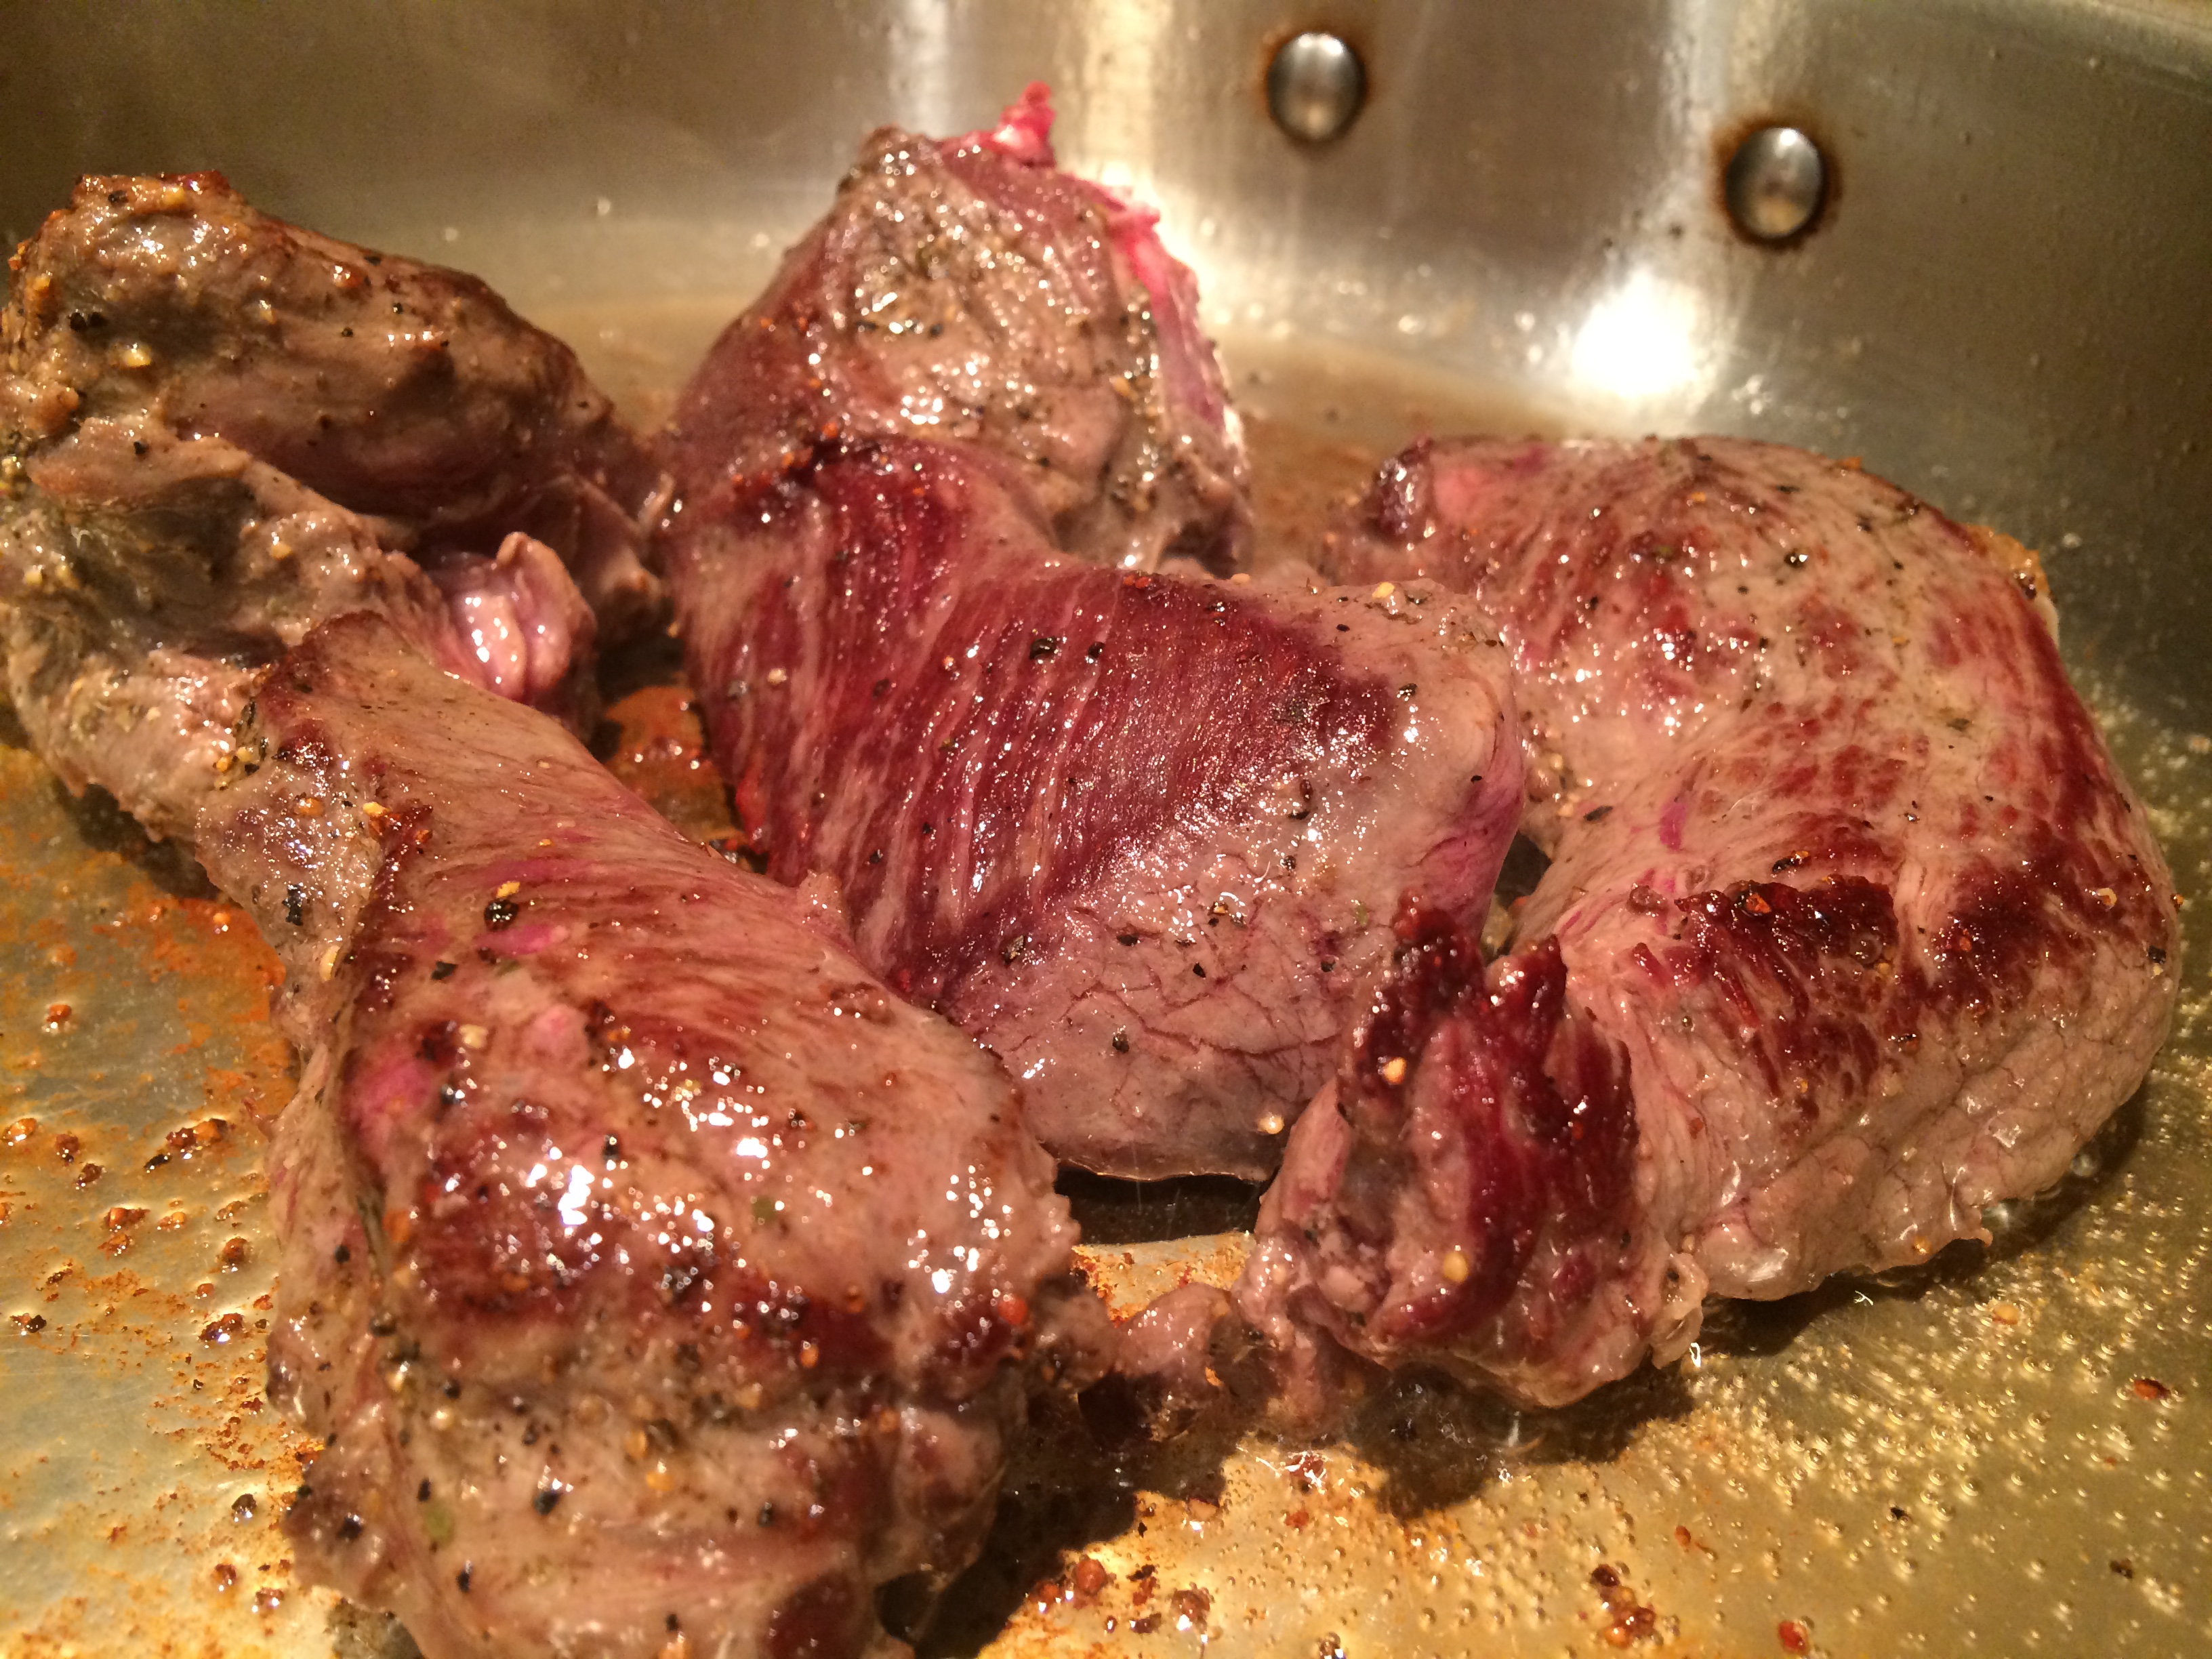 Venison steaks paleo style cooking